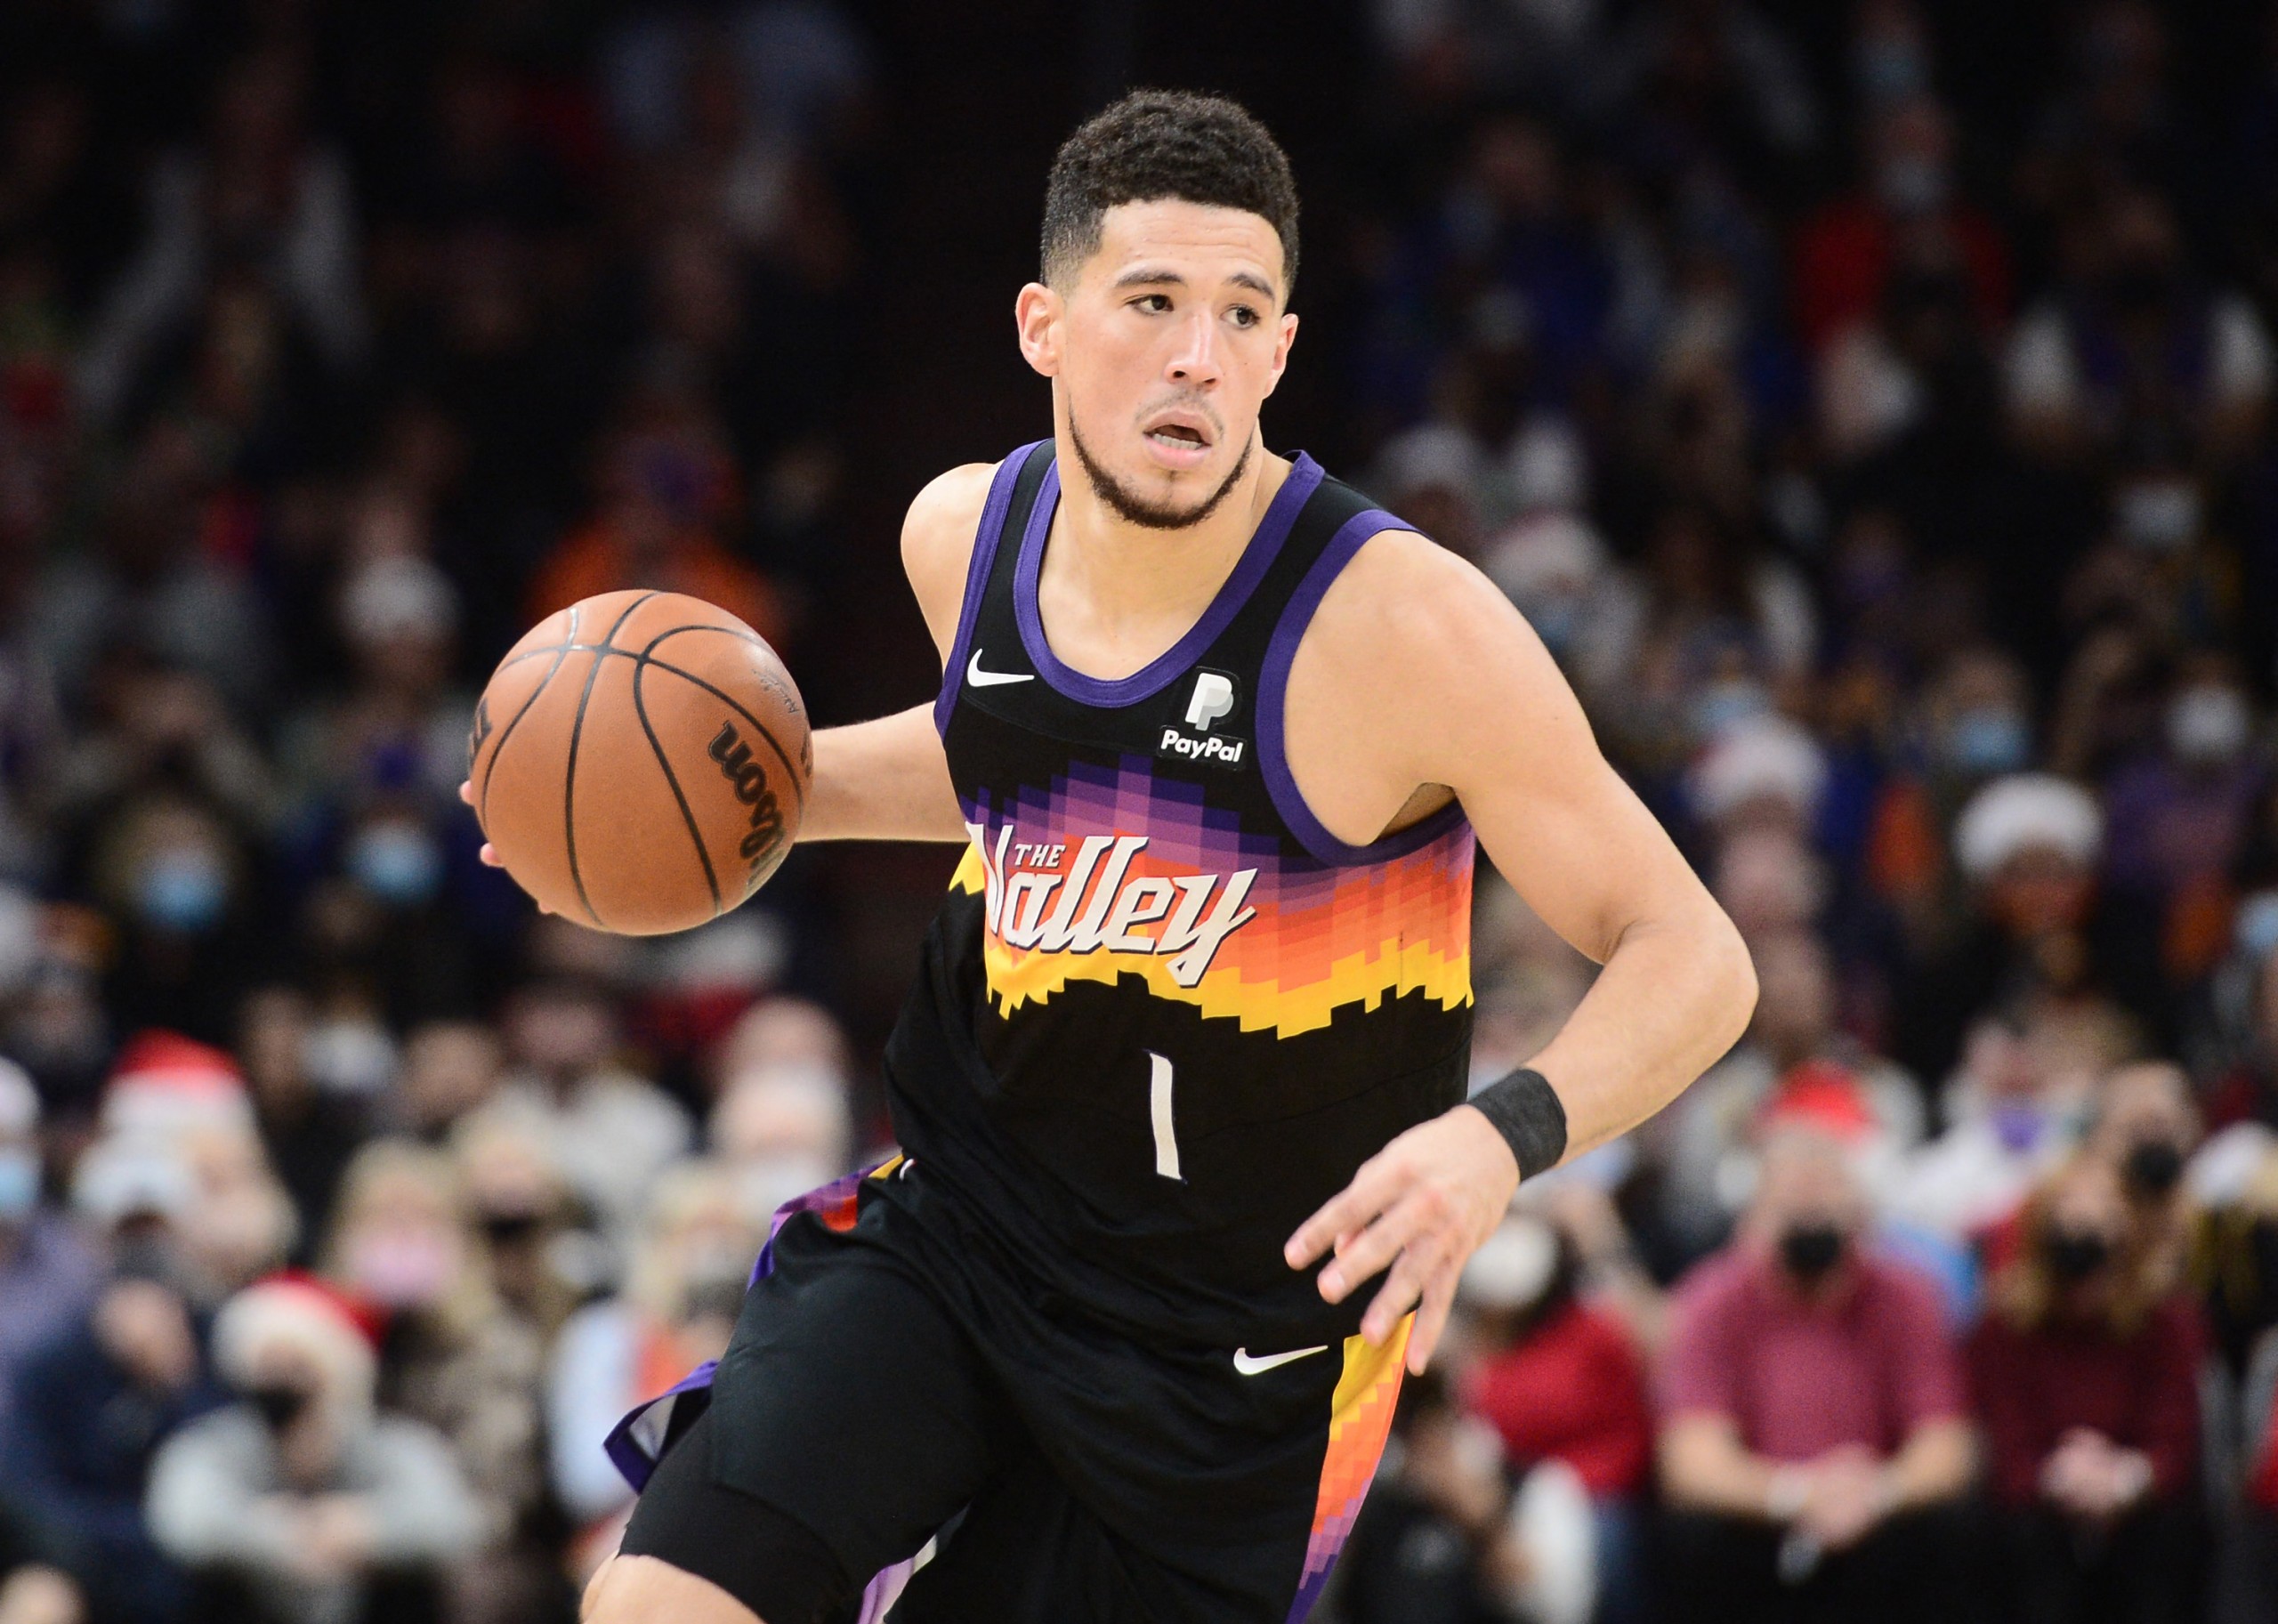 Dec 25, 2021; Phoenix, Arizona, USA; Phoenix Suns guard Devin Booker (1) dribbles against the Golden State Warriors during the first half at Footprint Center. Mandatory Credit: Joe Camporeale-USA TODAY Sports